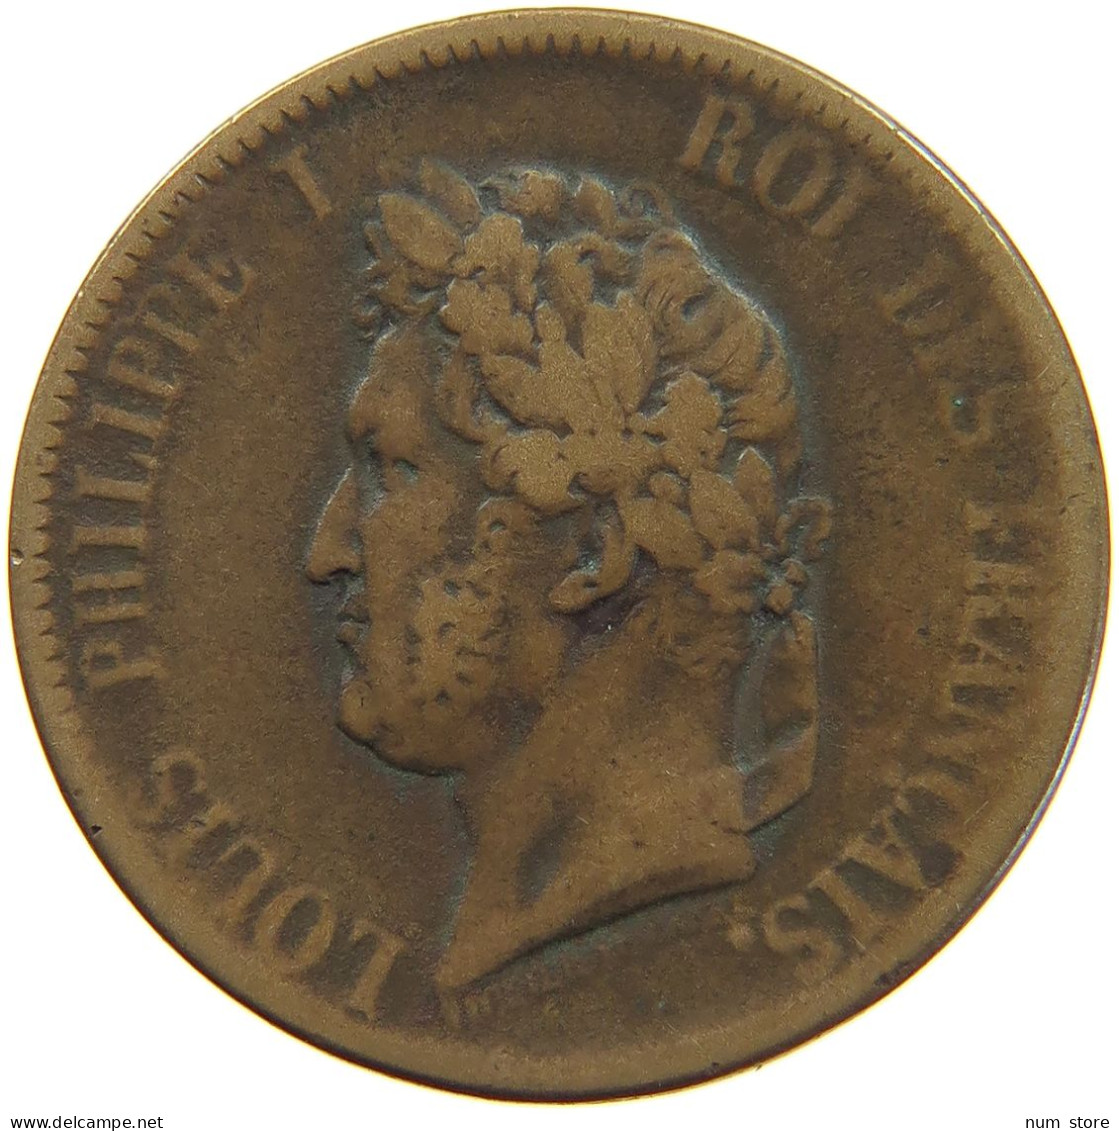 FRENCH COLONIES 5 CENTIMES 1839 A LOUIS PHILIPPE I. (1830-1848) #c061 0061 - Franse Koloniën (1817-1844)